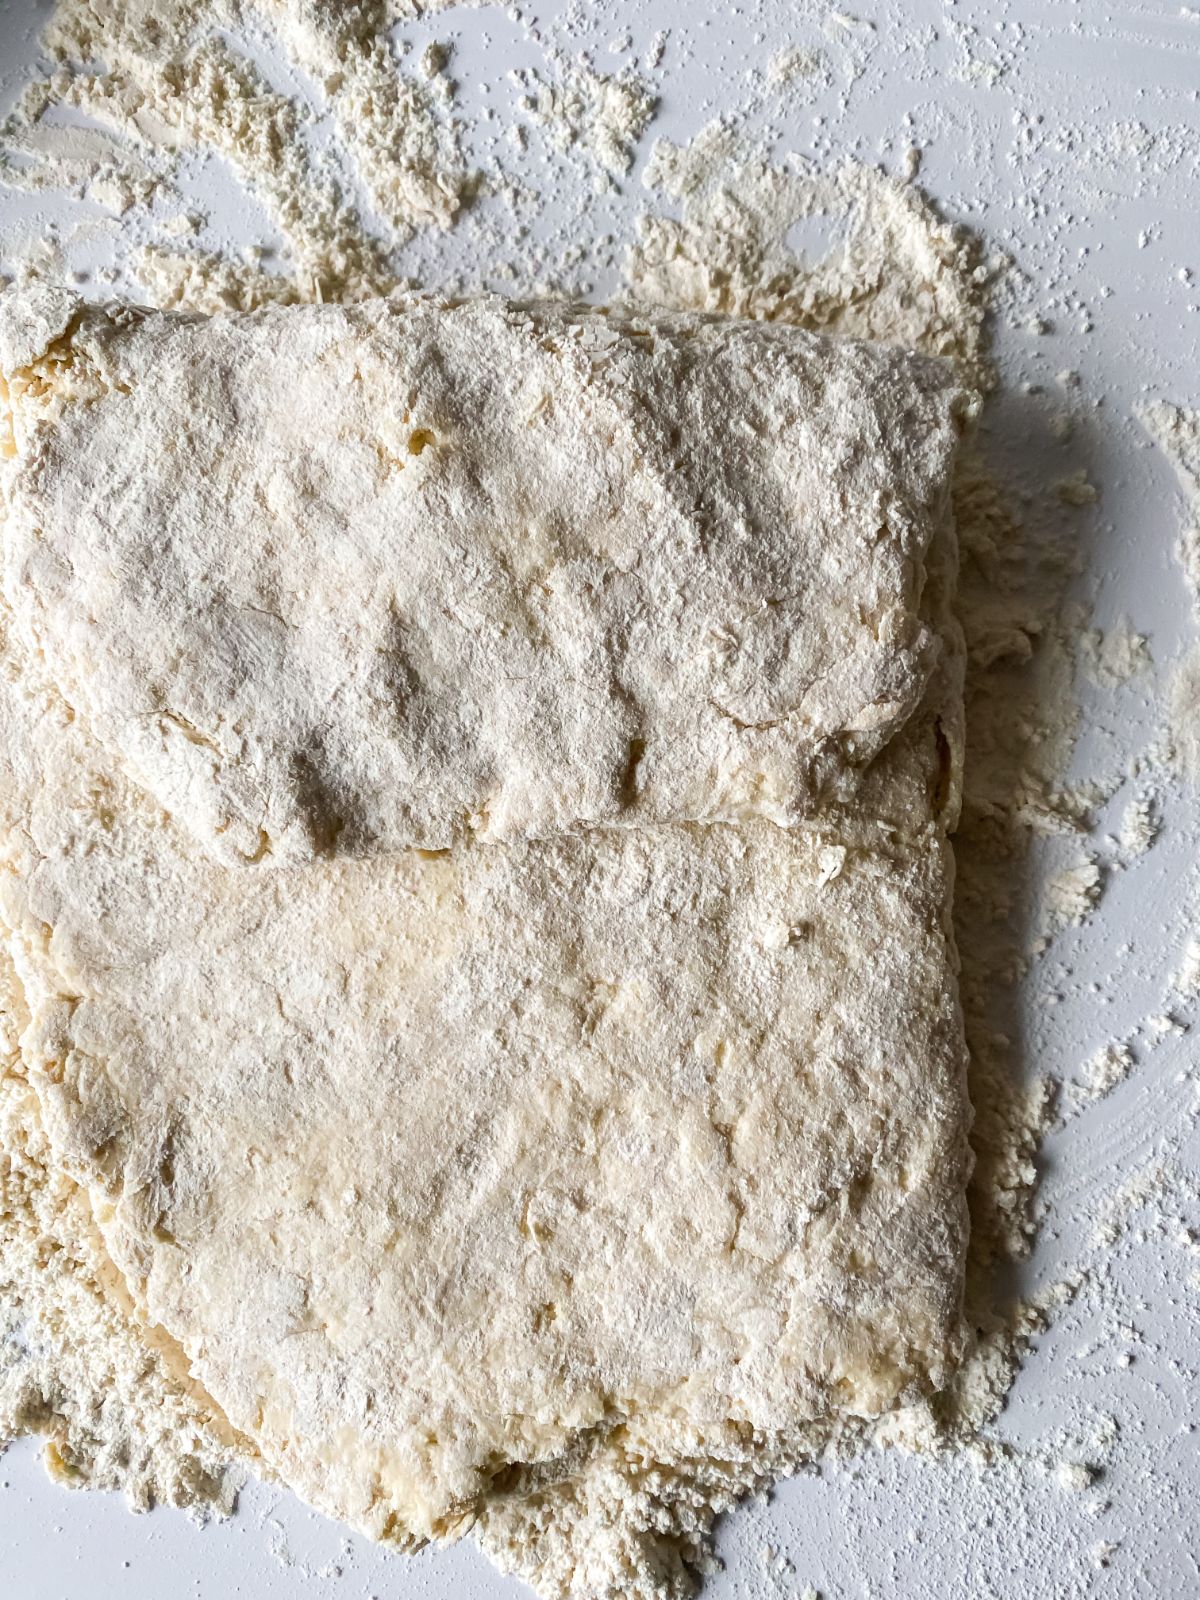 biscuit dough folded over itself on white table